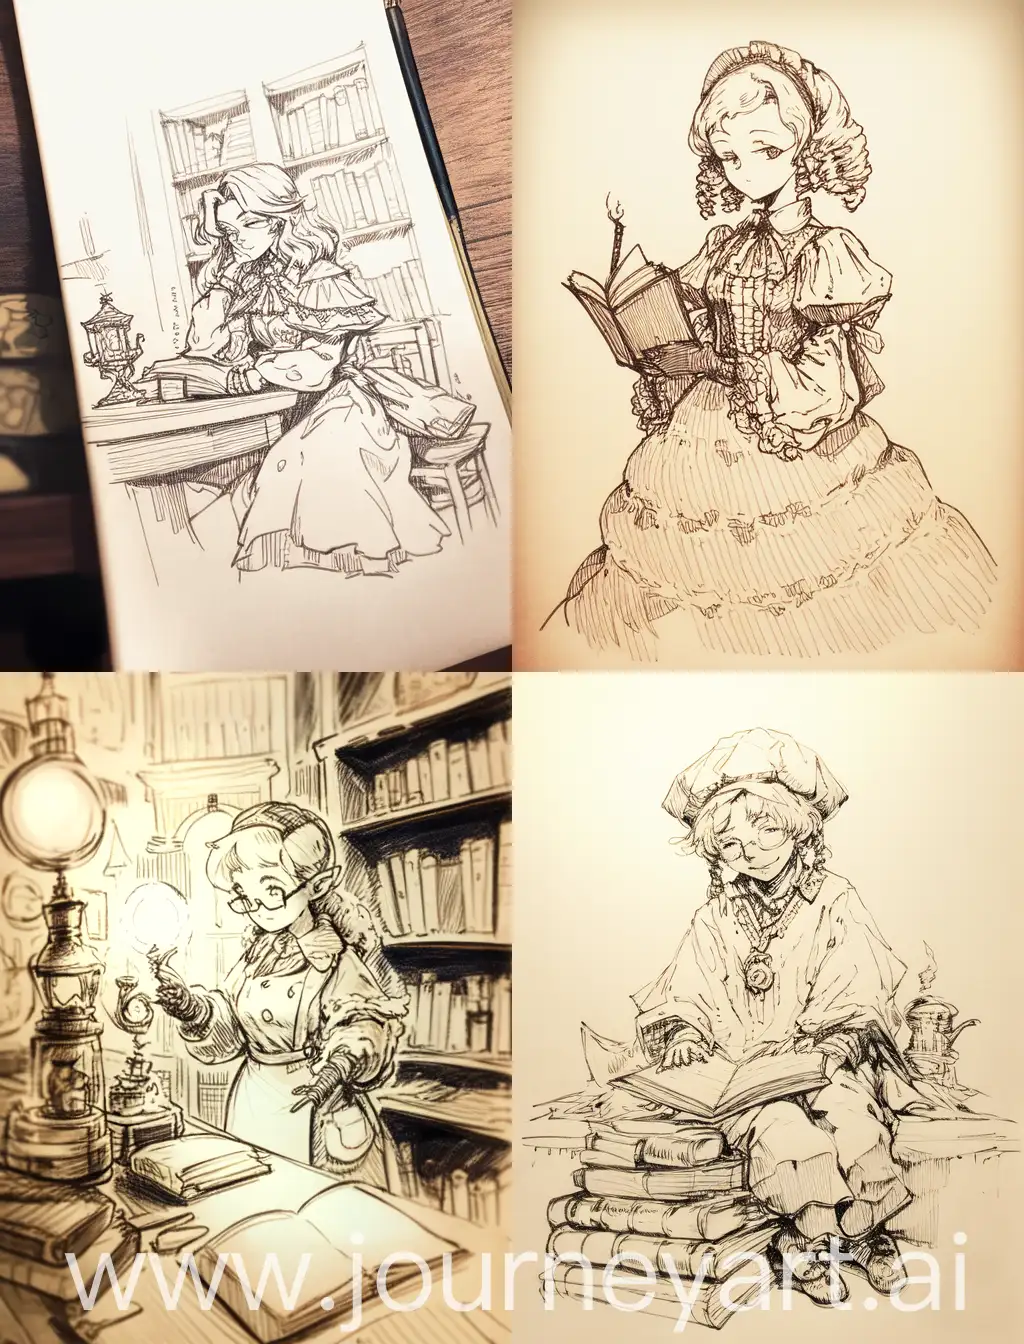 antique, old master pen drawing style, researcher with book in hand, character design.